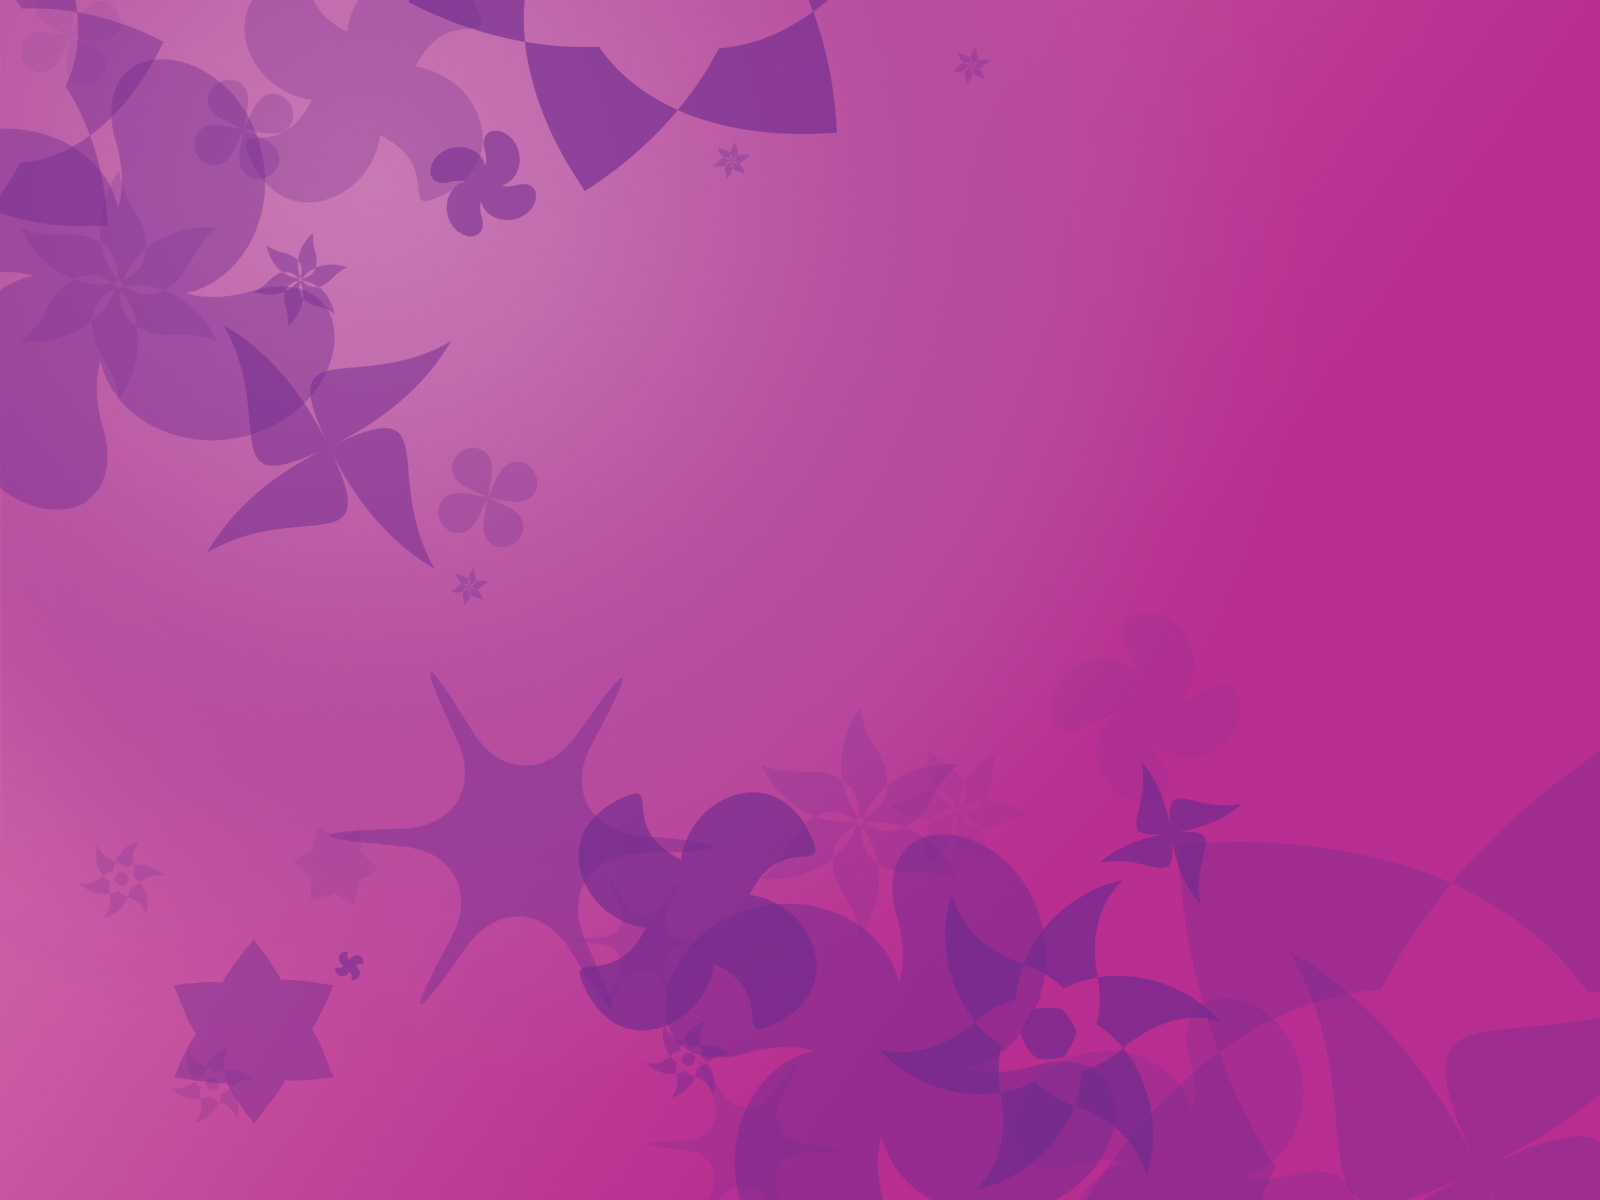  Purple background with stars and flowers Background